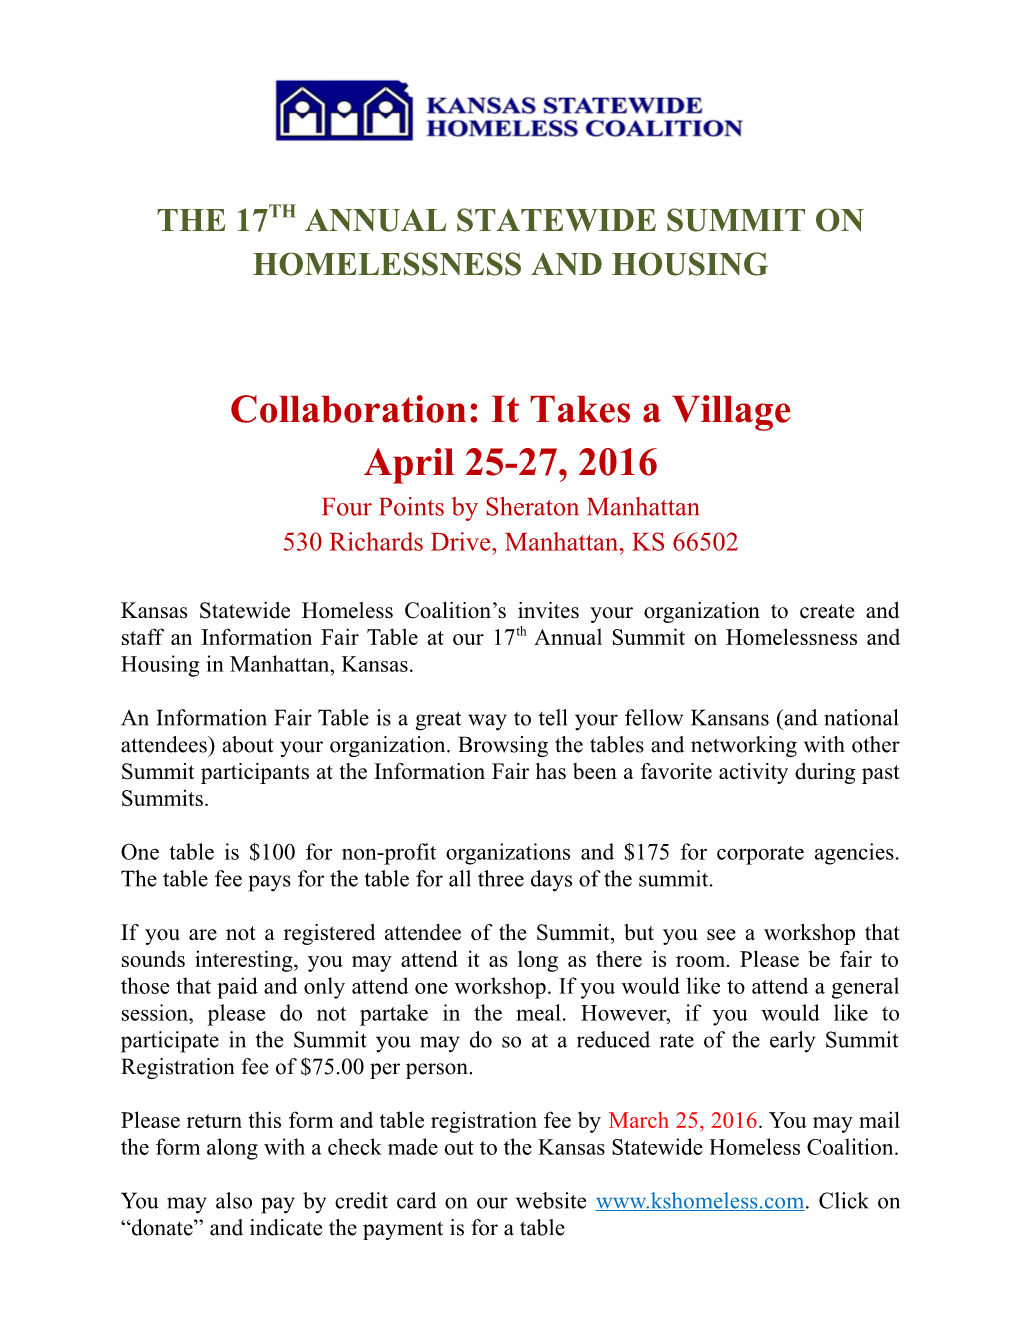 The 17Th Annual Statewide Summit on Homelessness and Housing